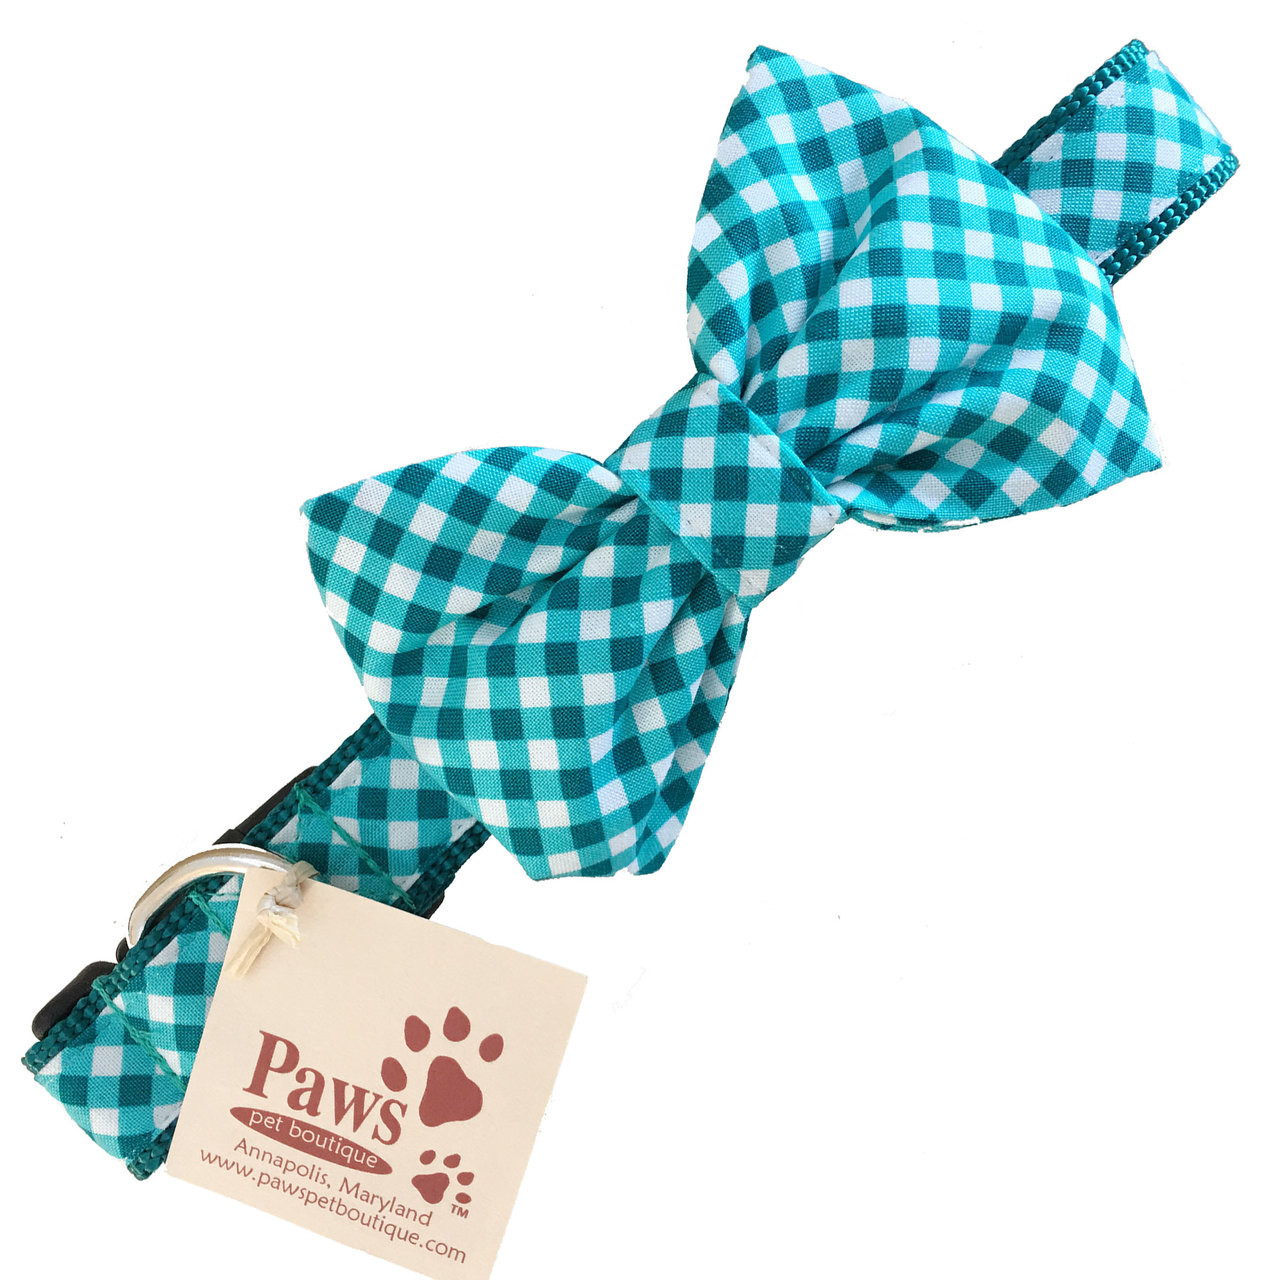 dog collar and bow tie